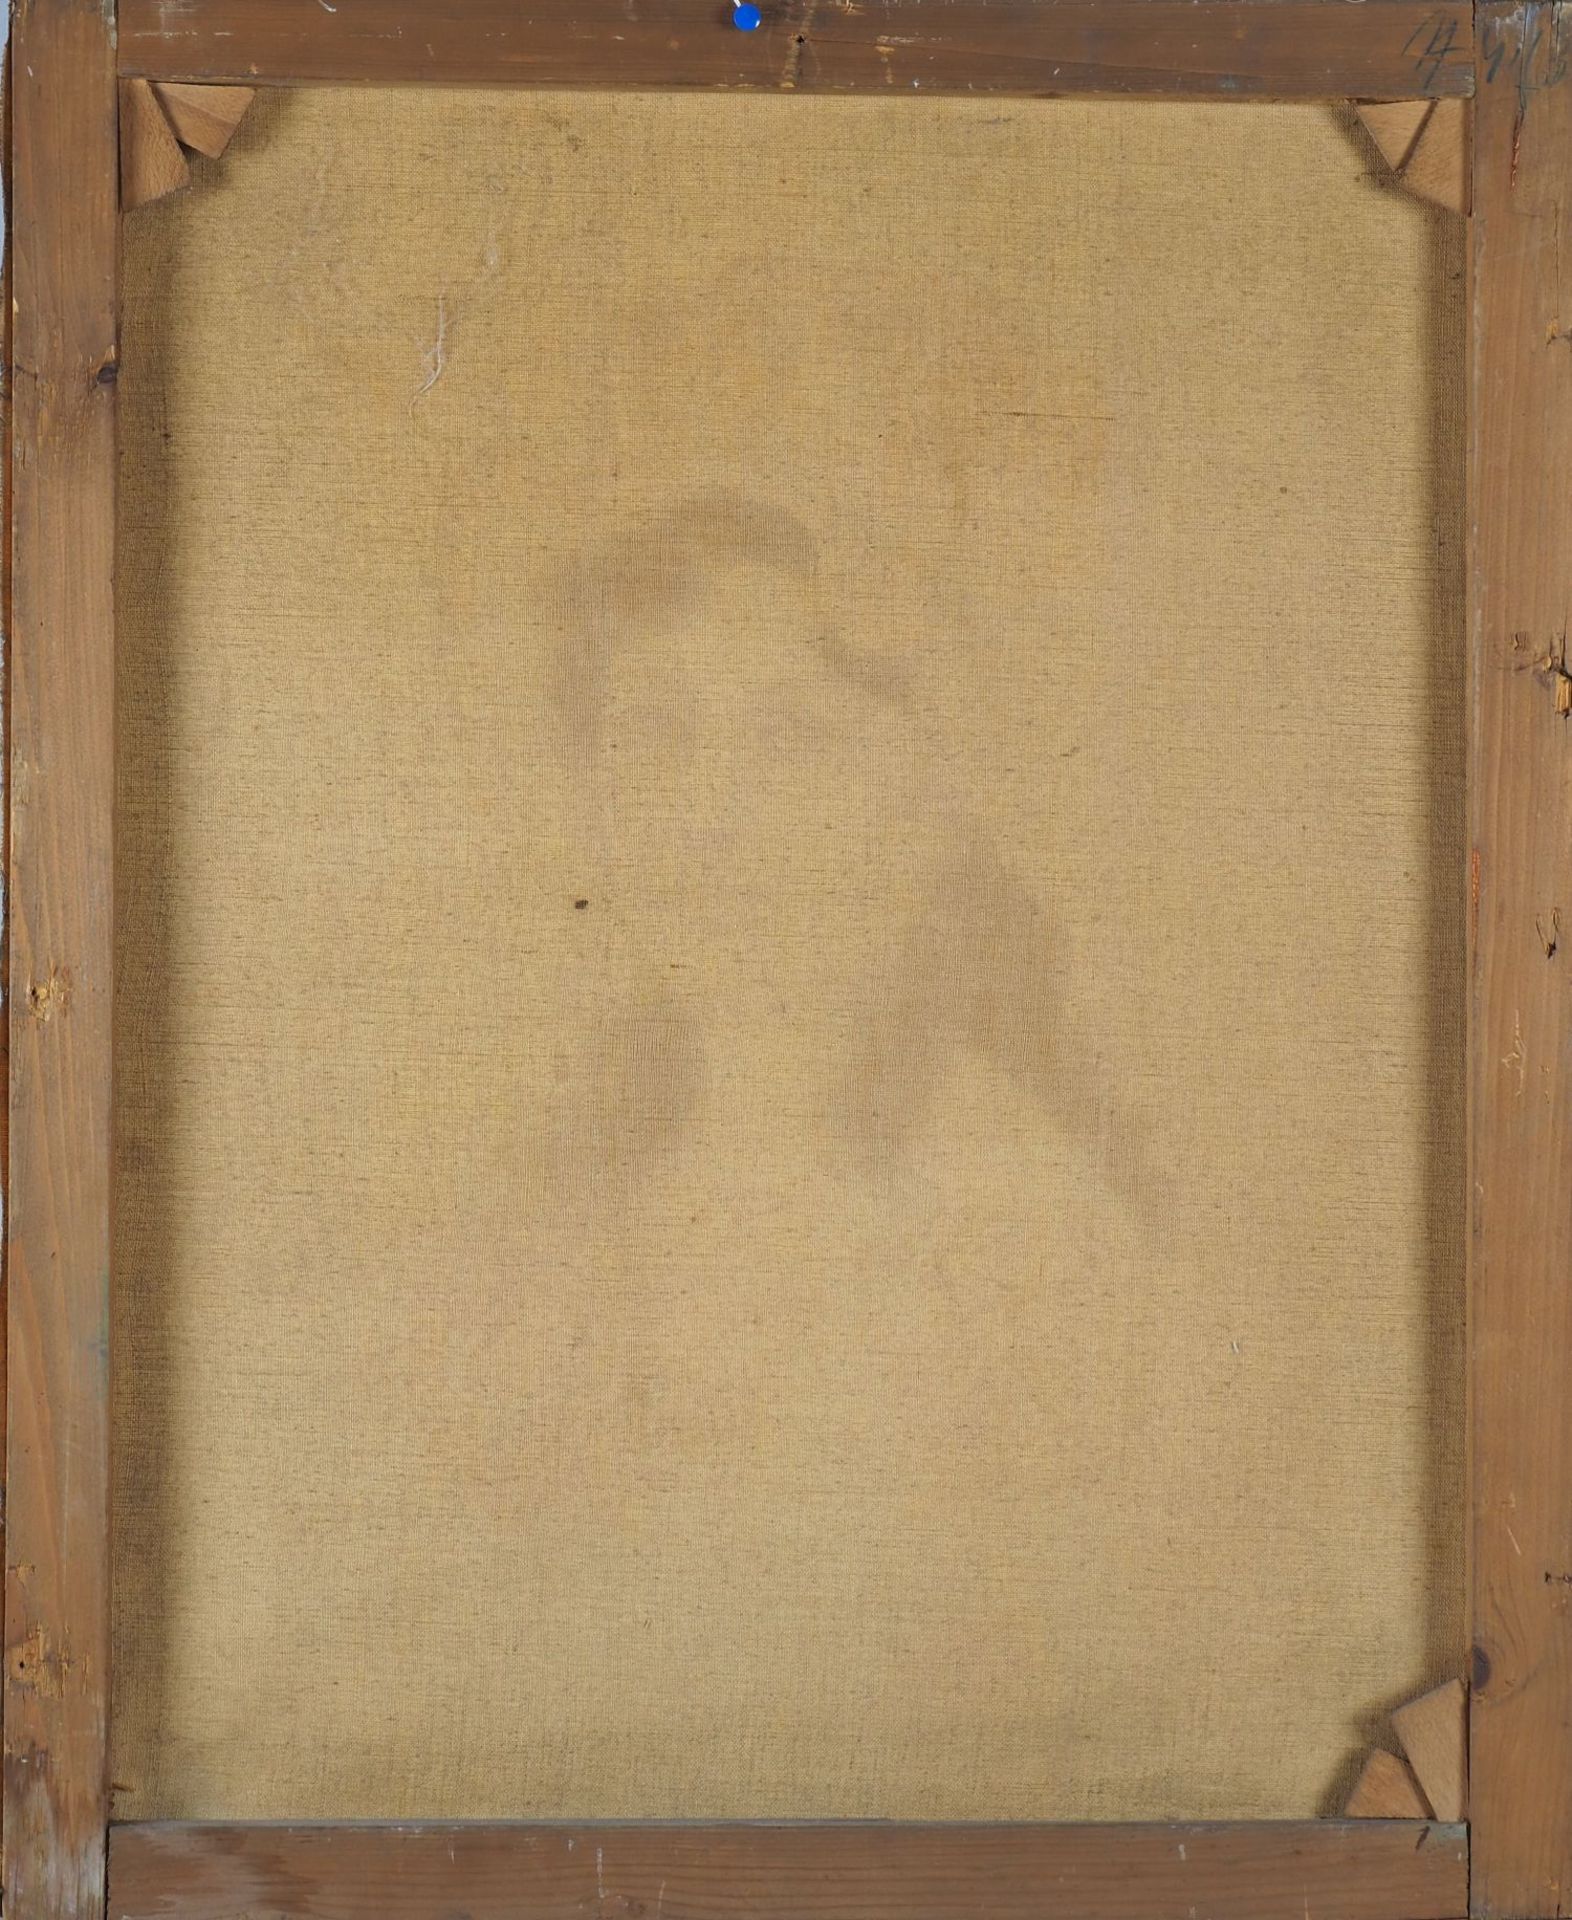 Portrait of a lady at the end of the 19th century - signed. "J. Bouché" - Image 4 of 4